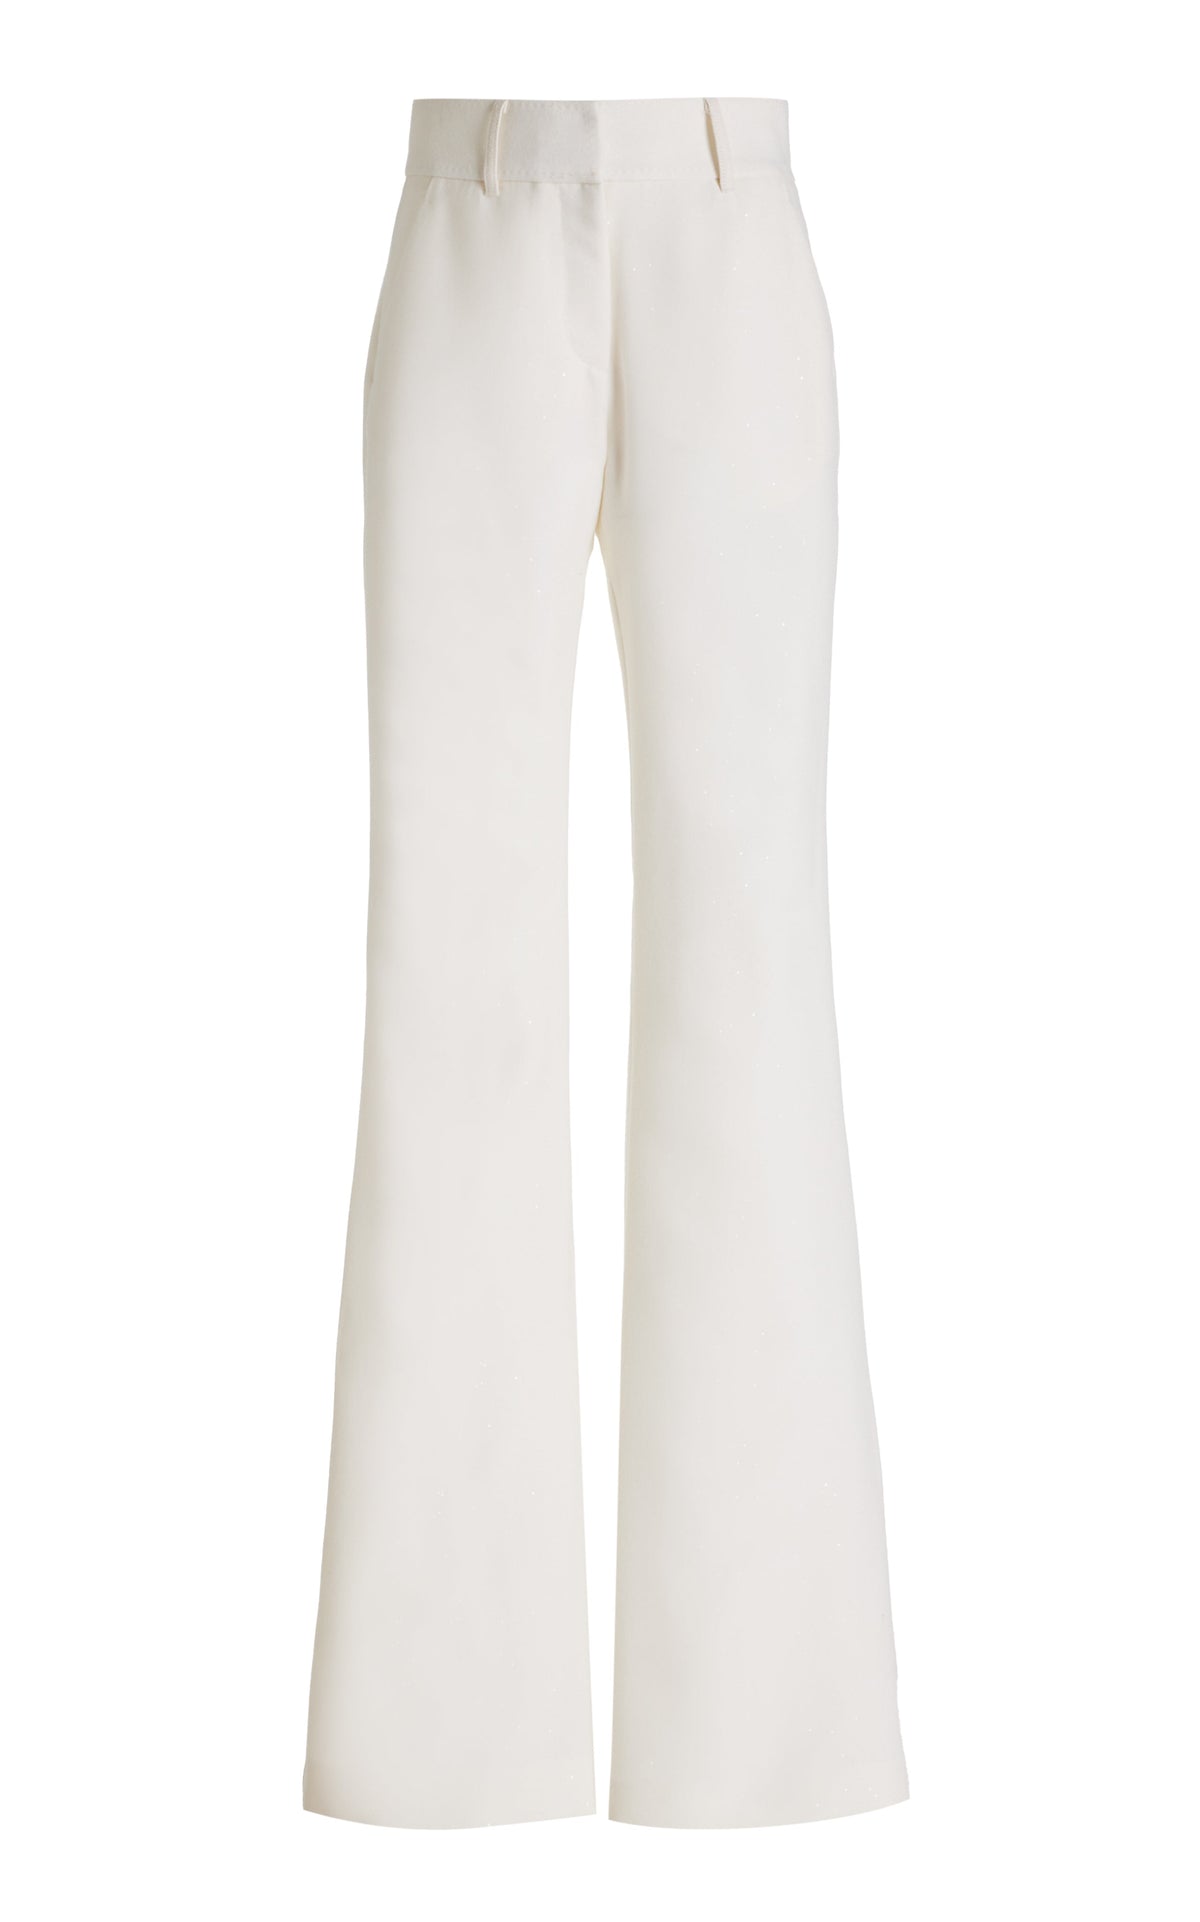 Allanon Sequin Pant in Ivory Wool